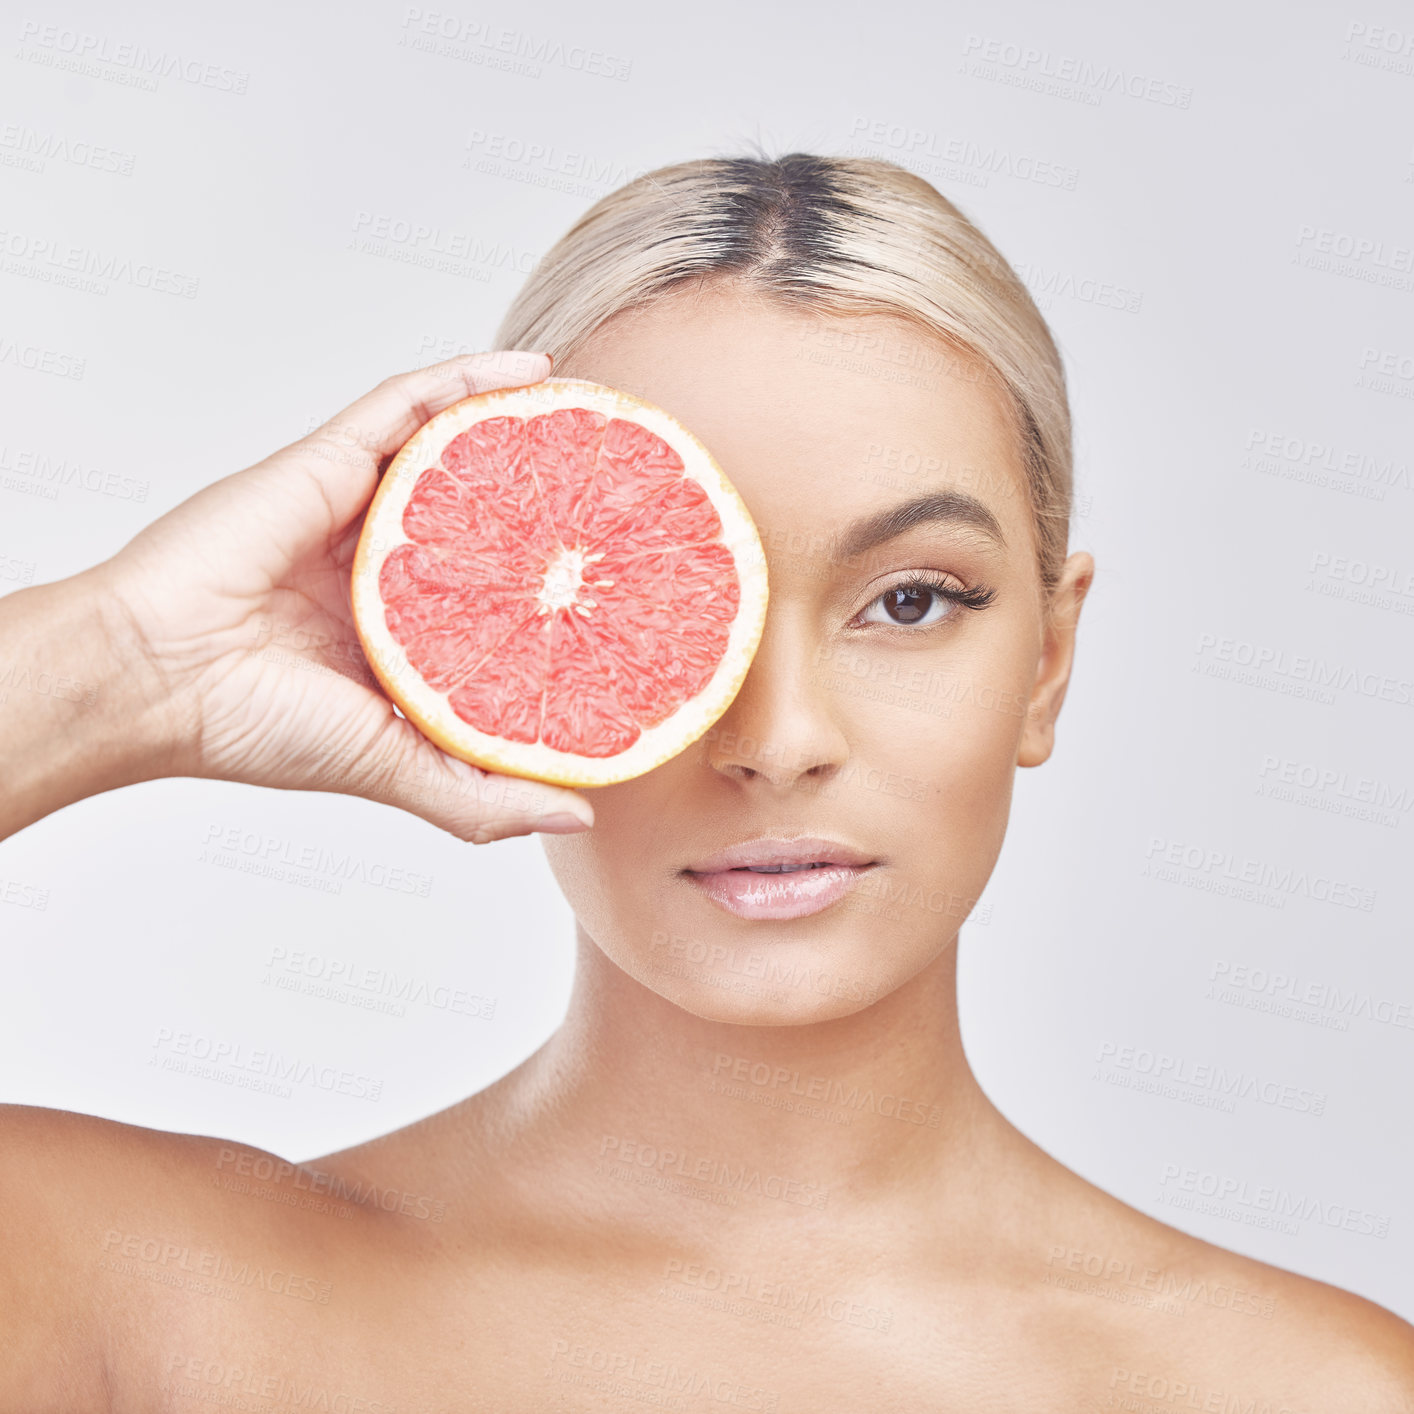 Buy stock photo Studio shot of a beautiful young woman holding a grapefruit in front of her eye against a grey background